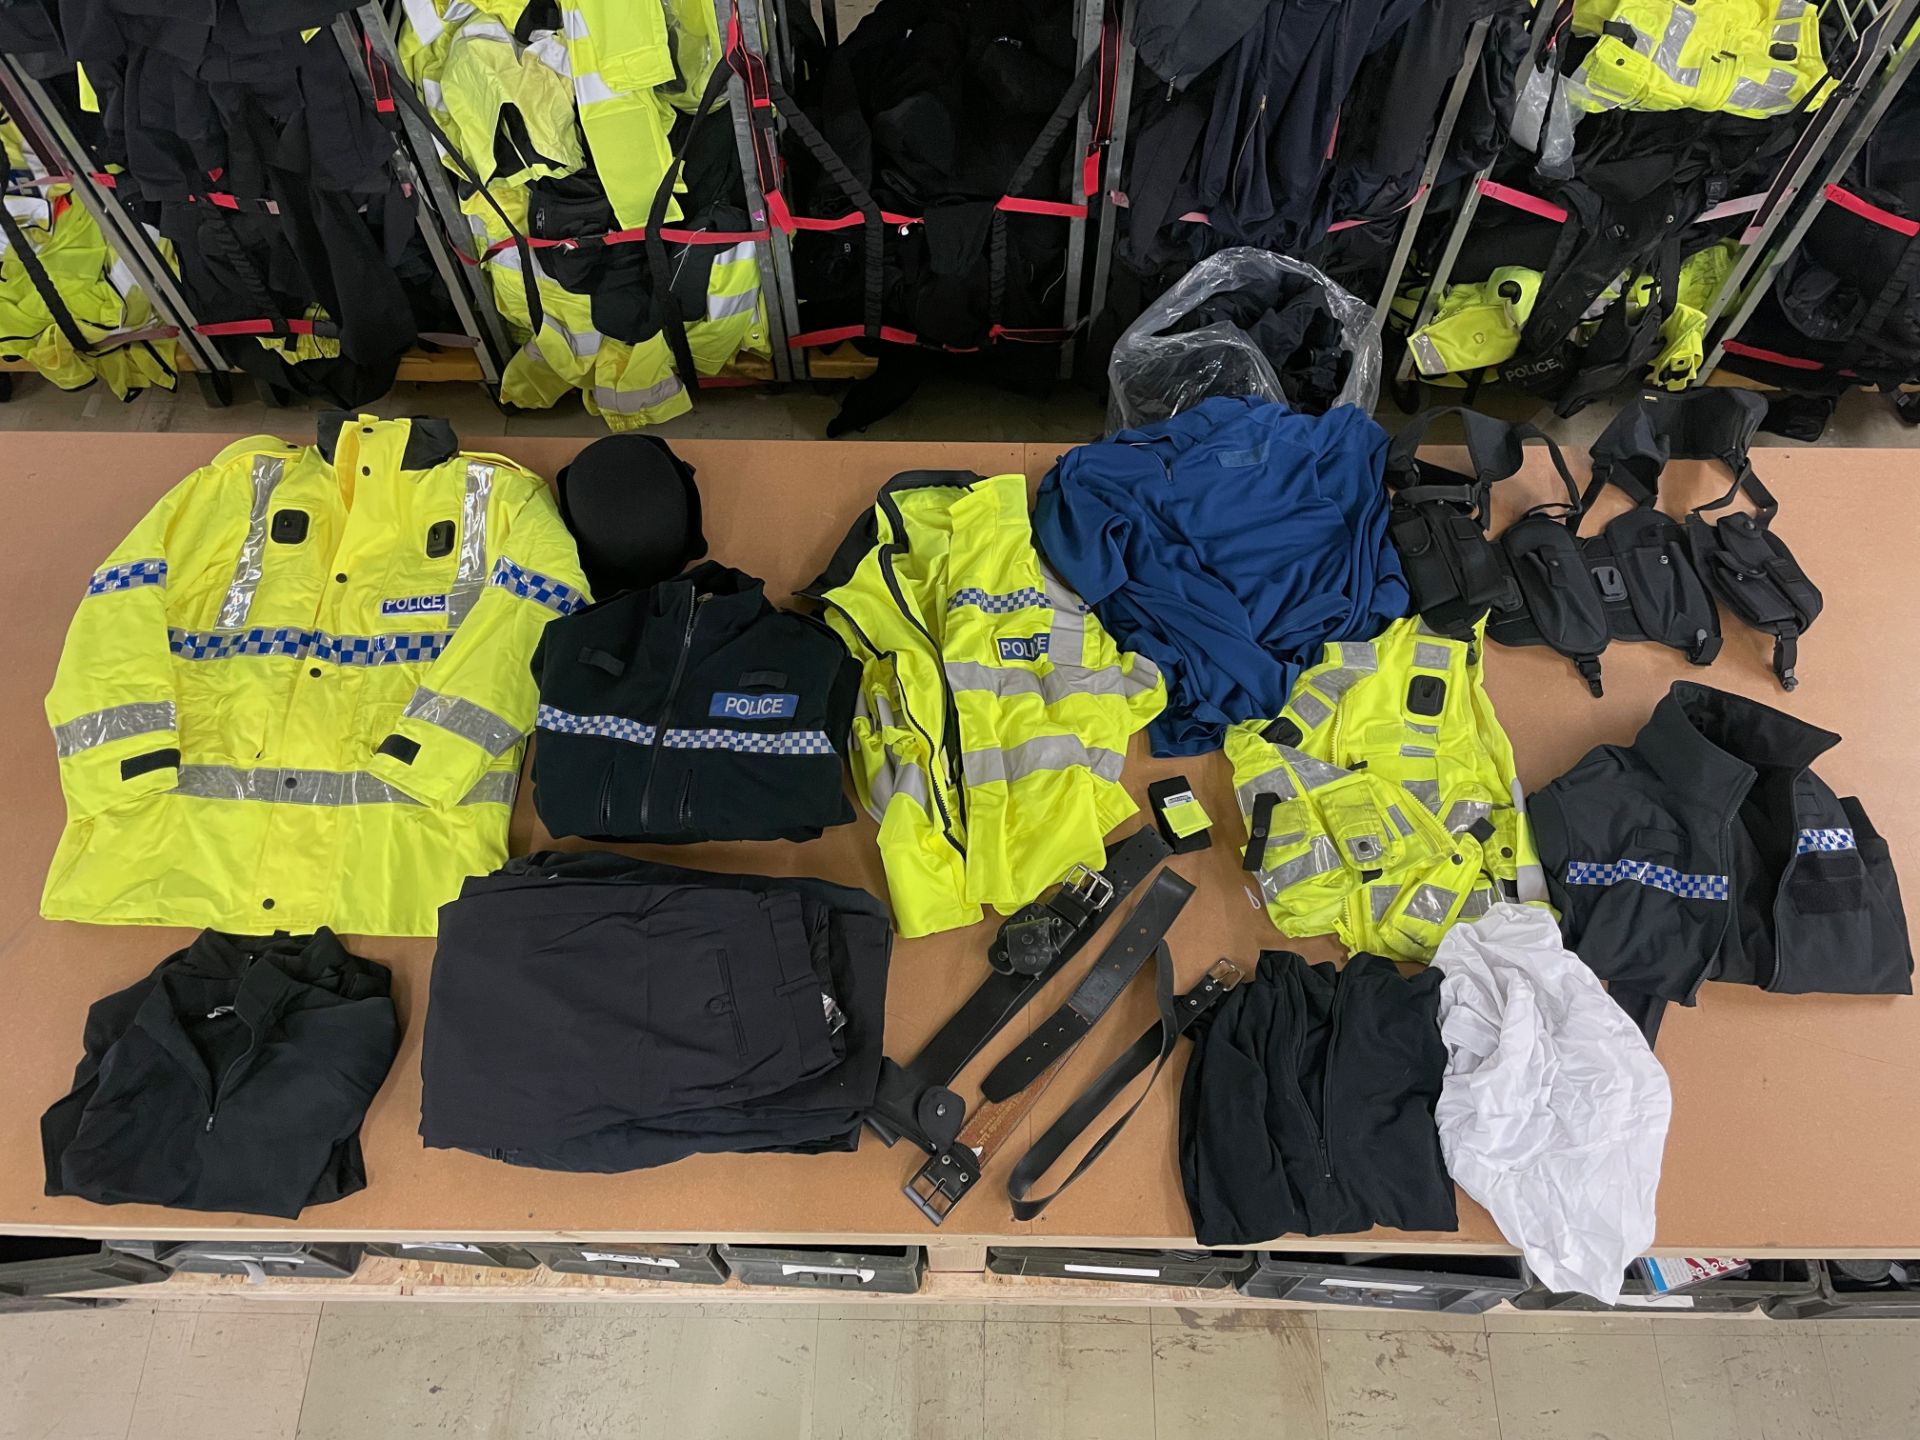 20 X BAGS EX POLICE CLOTHING & ACCESSORIES - RRP £5500.00 - Image 11 of 12